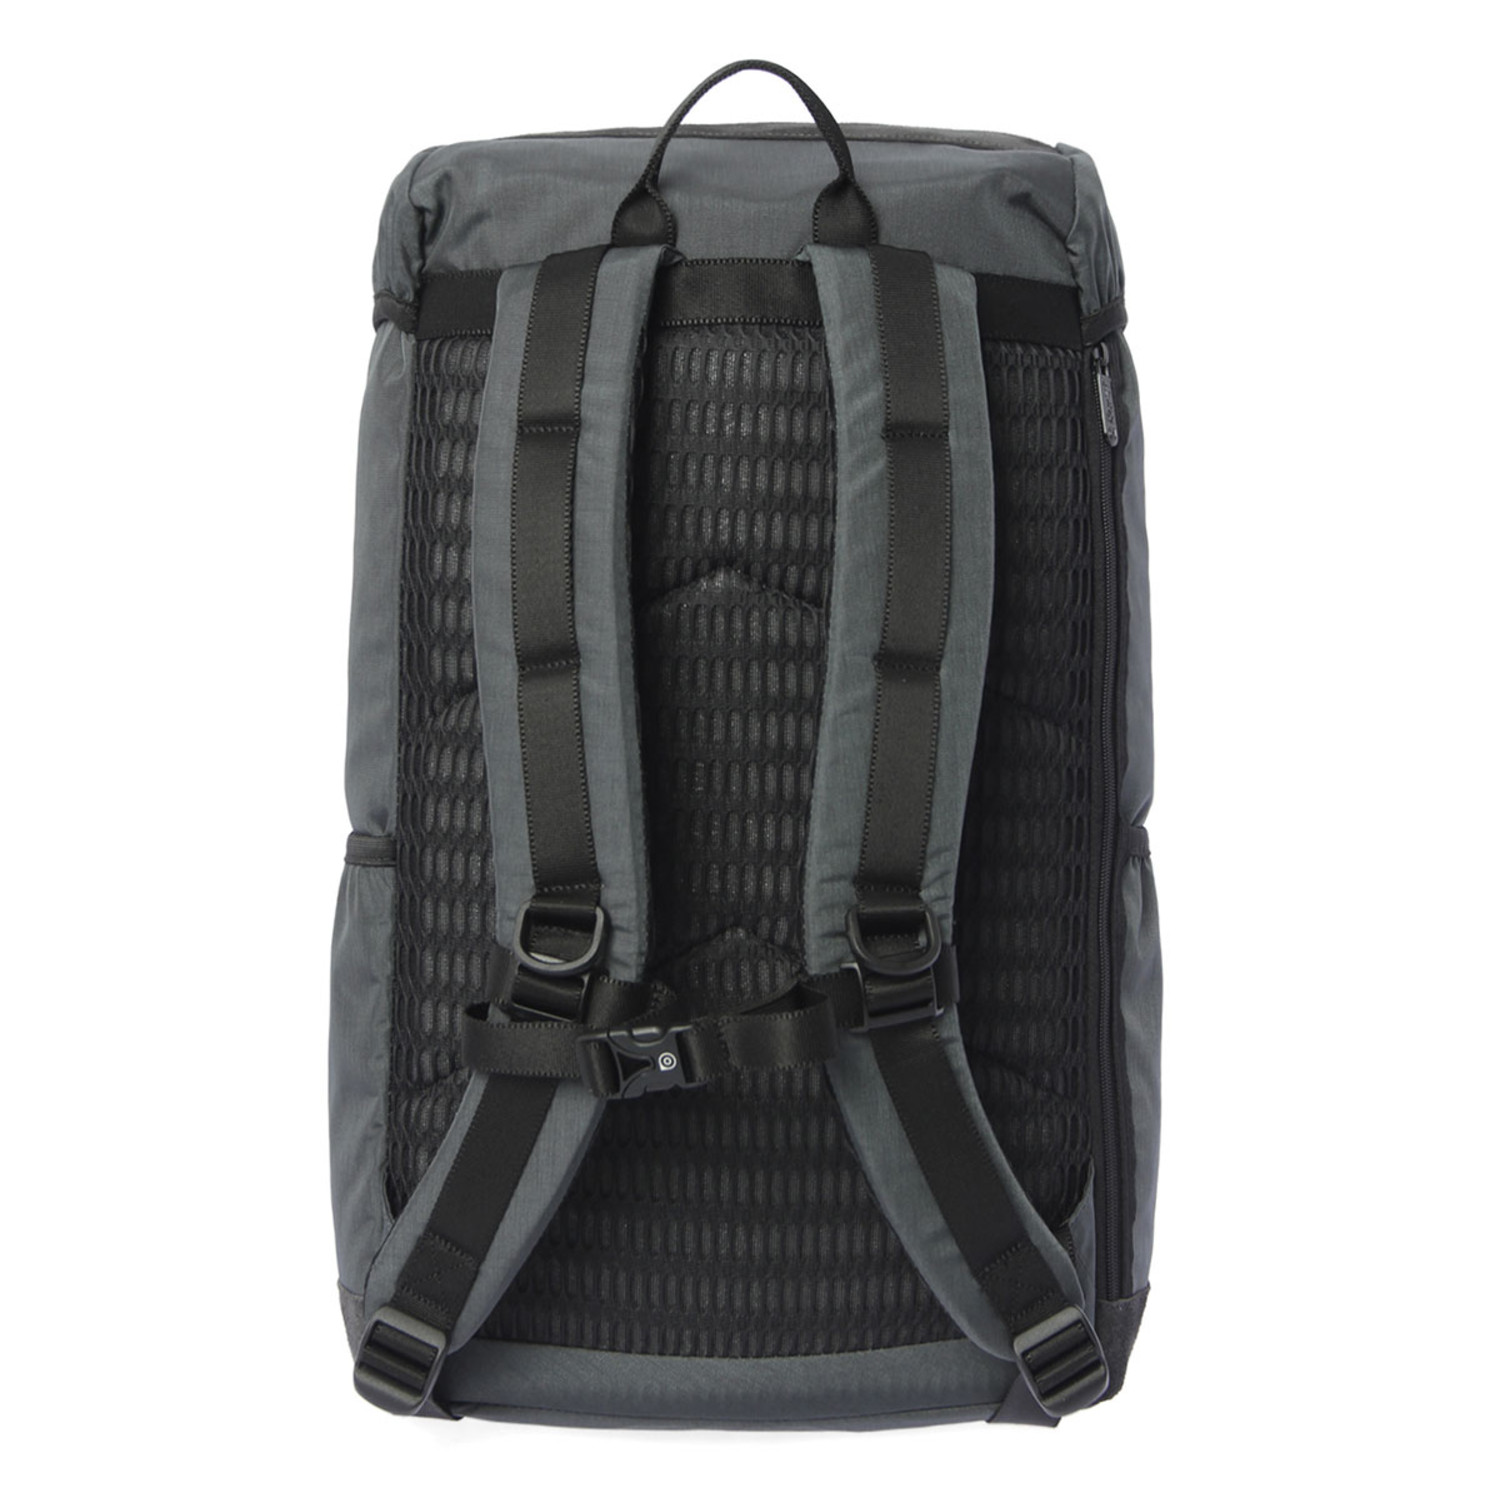 New Disaster Backpack (Black) - The Earth Shop - Touch of Modern